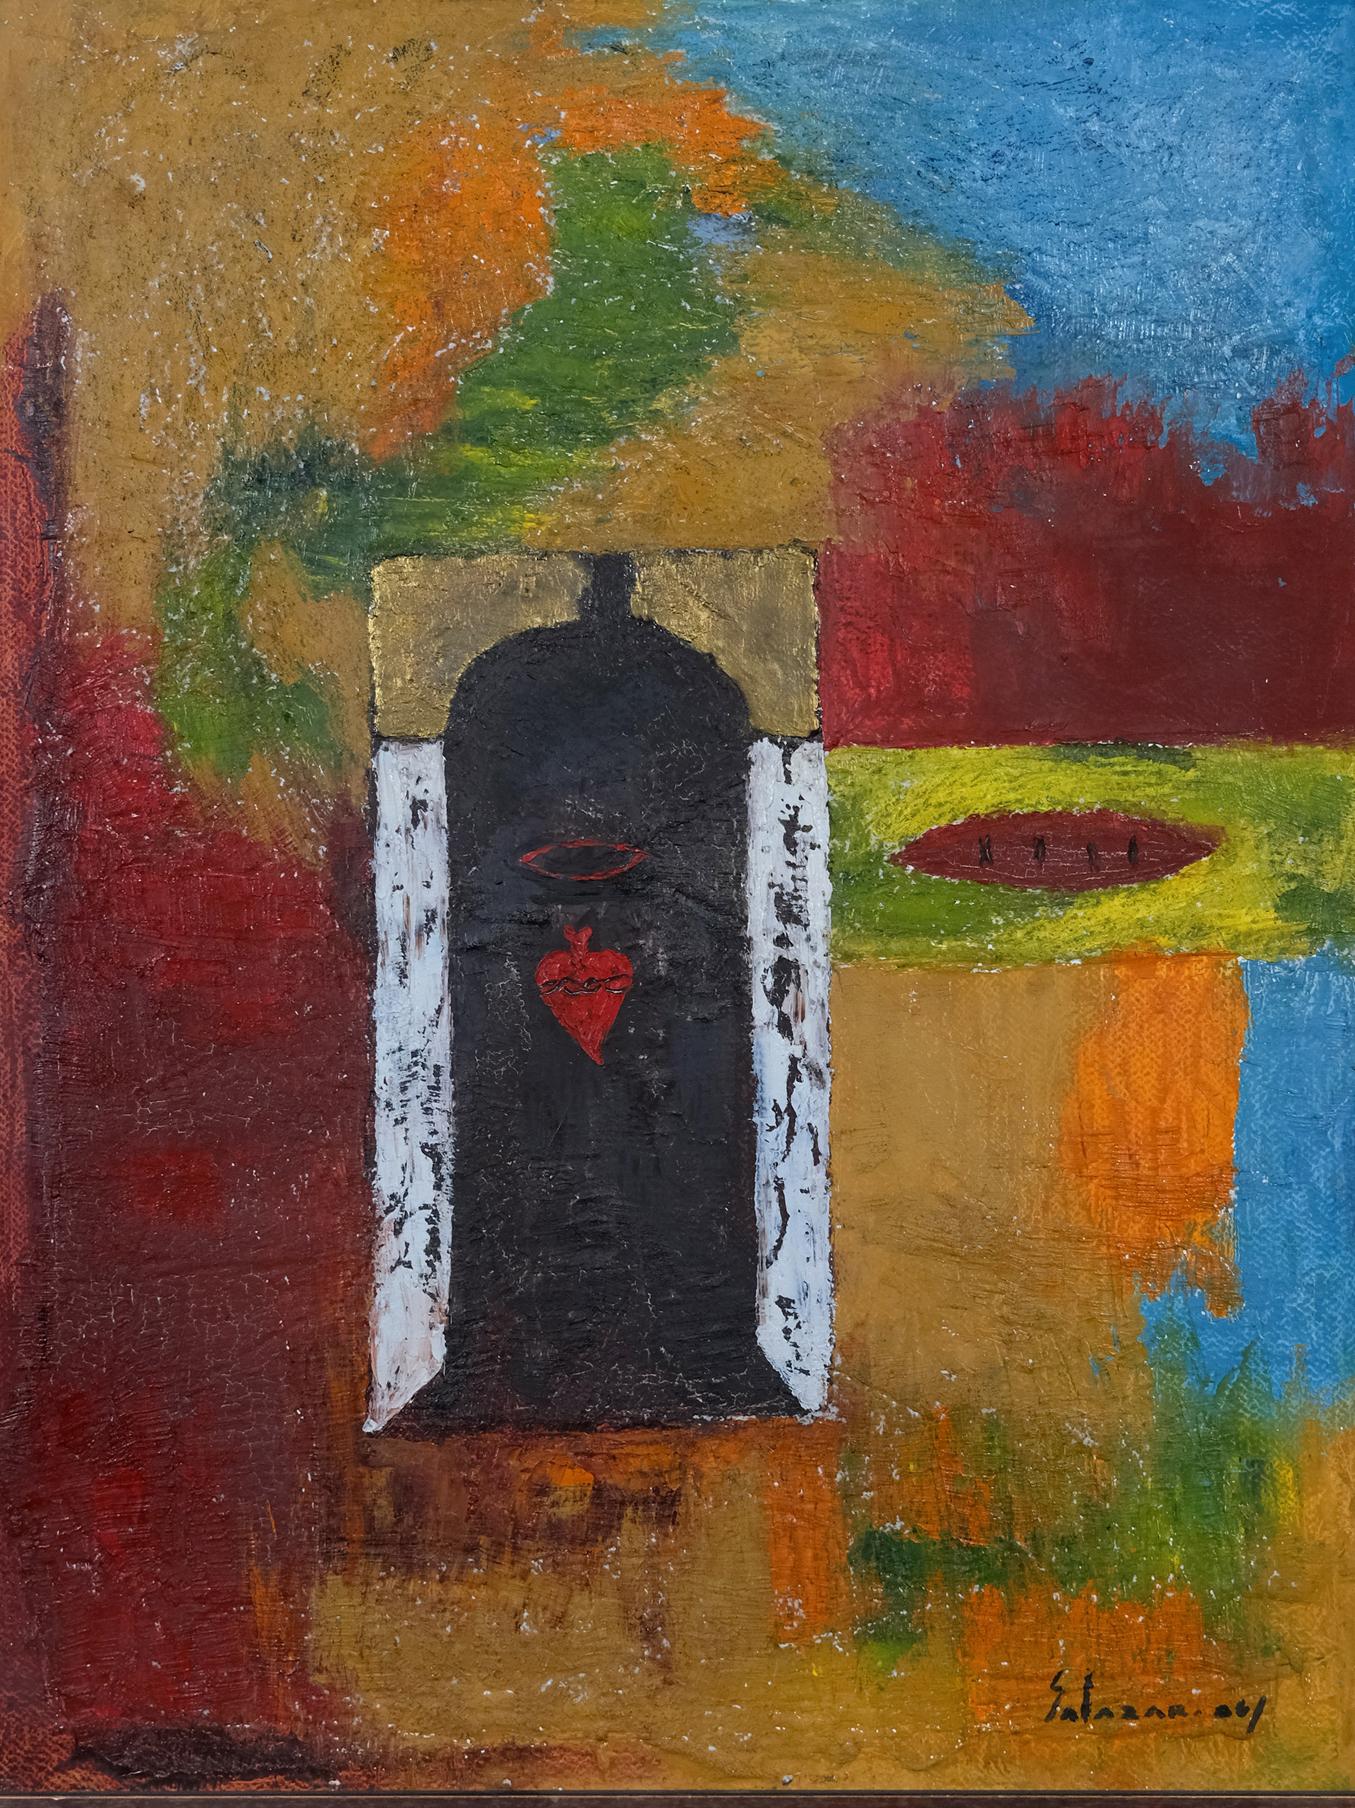  Open Door to the Heart  Oil on Paper  Mixed Media  Ecuador Framed  Quito - Painting by Luis Salazar